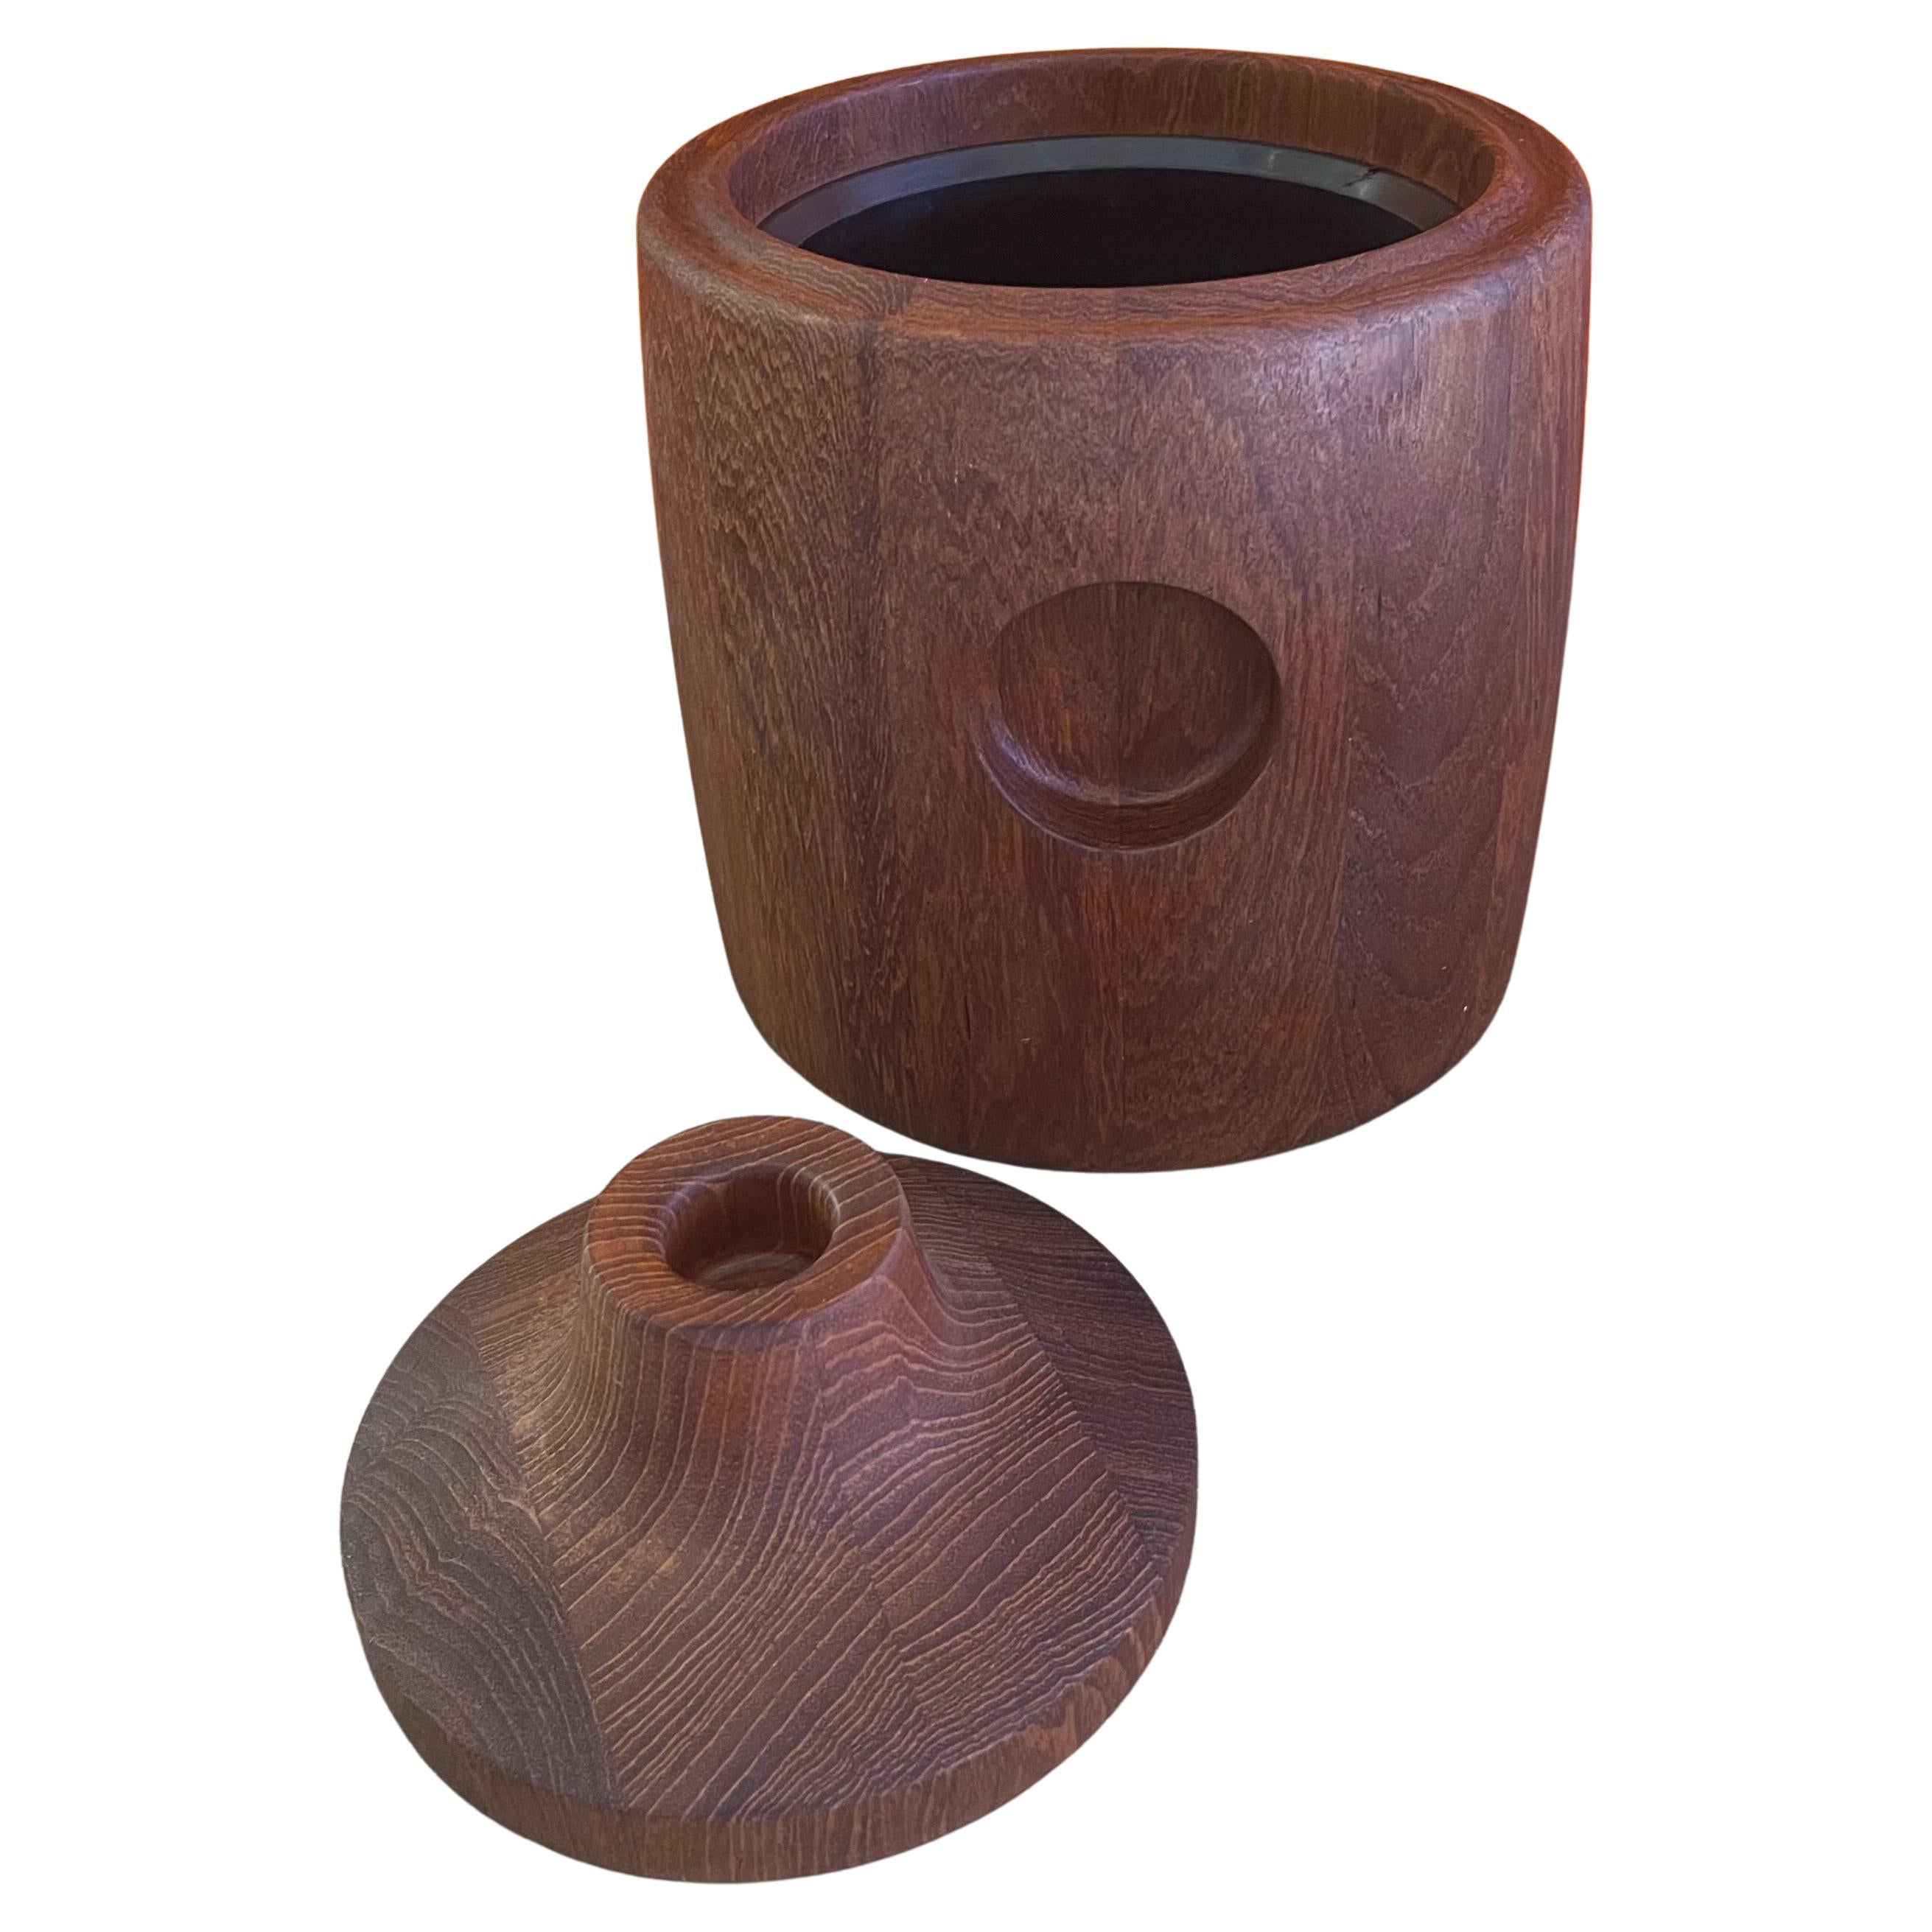 Beautiful Danish modern staved teak ice bucket by Henning Koppel for George Jensen, circa 1950s. The bucket is in very good vintage condition and measures 8.5